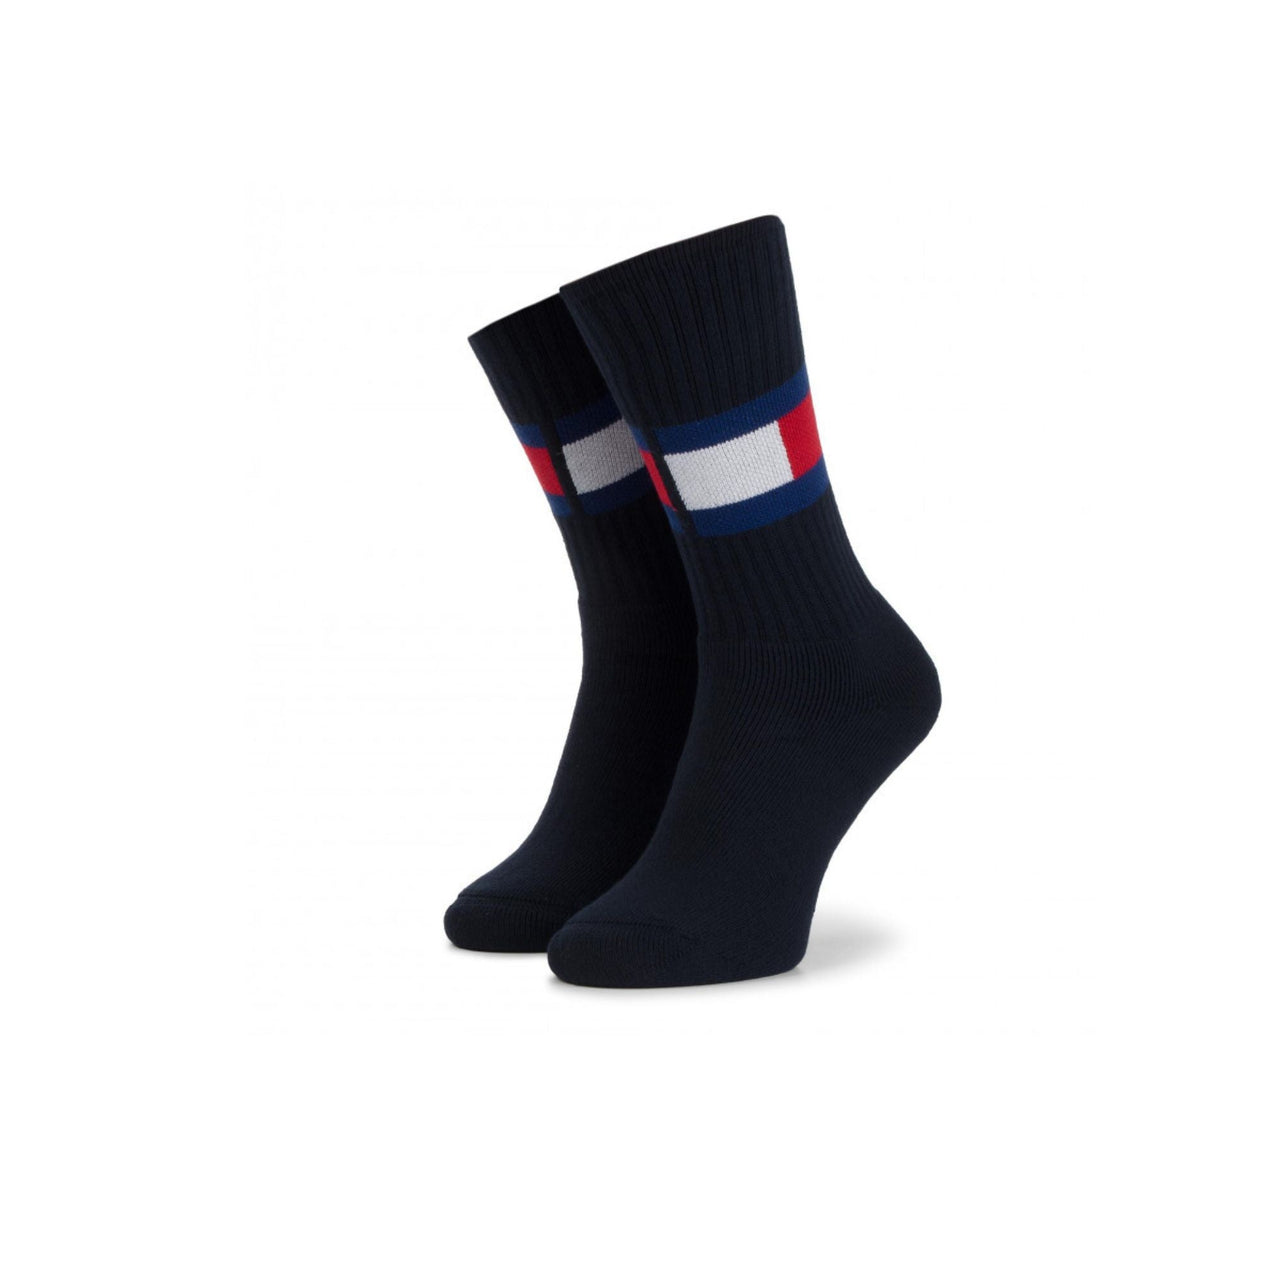 Calcetines Tommy Hilfiger de mujer